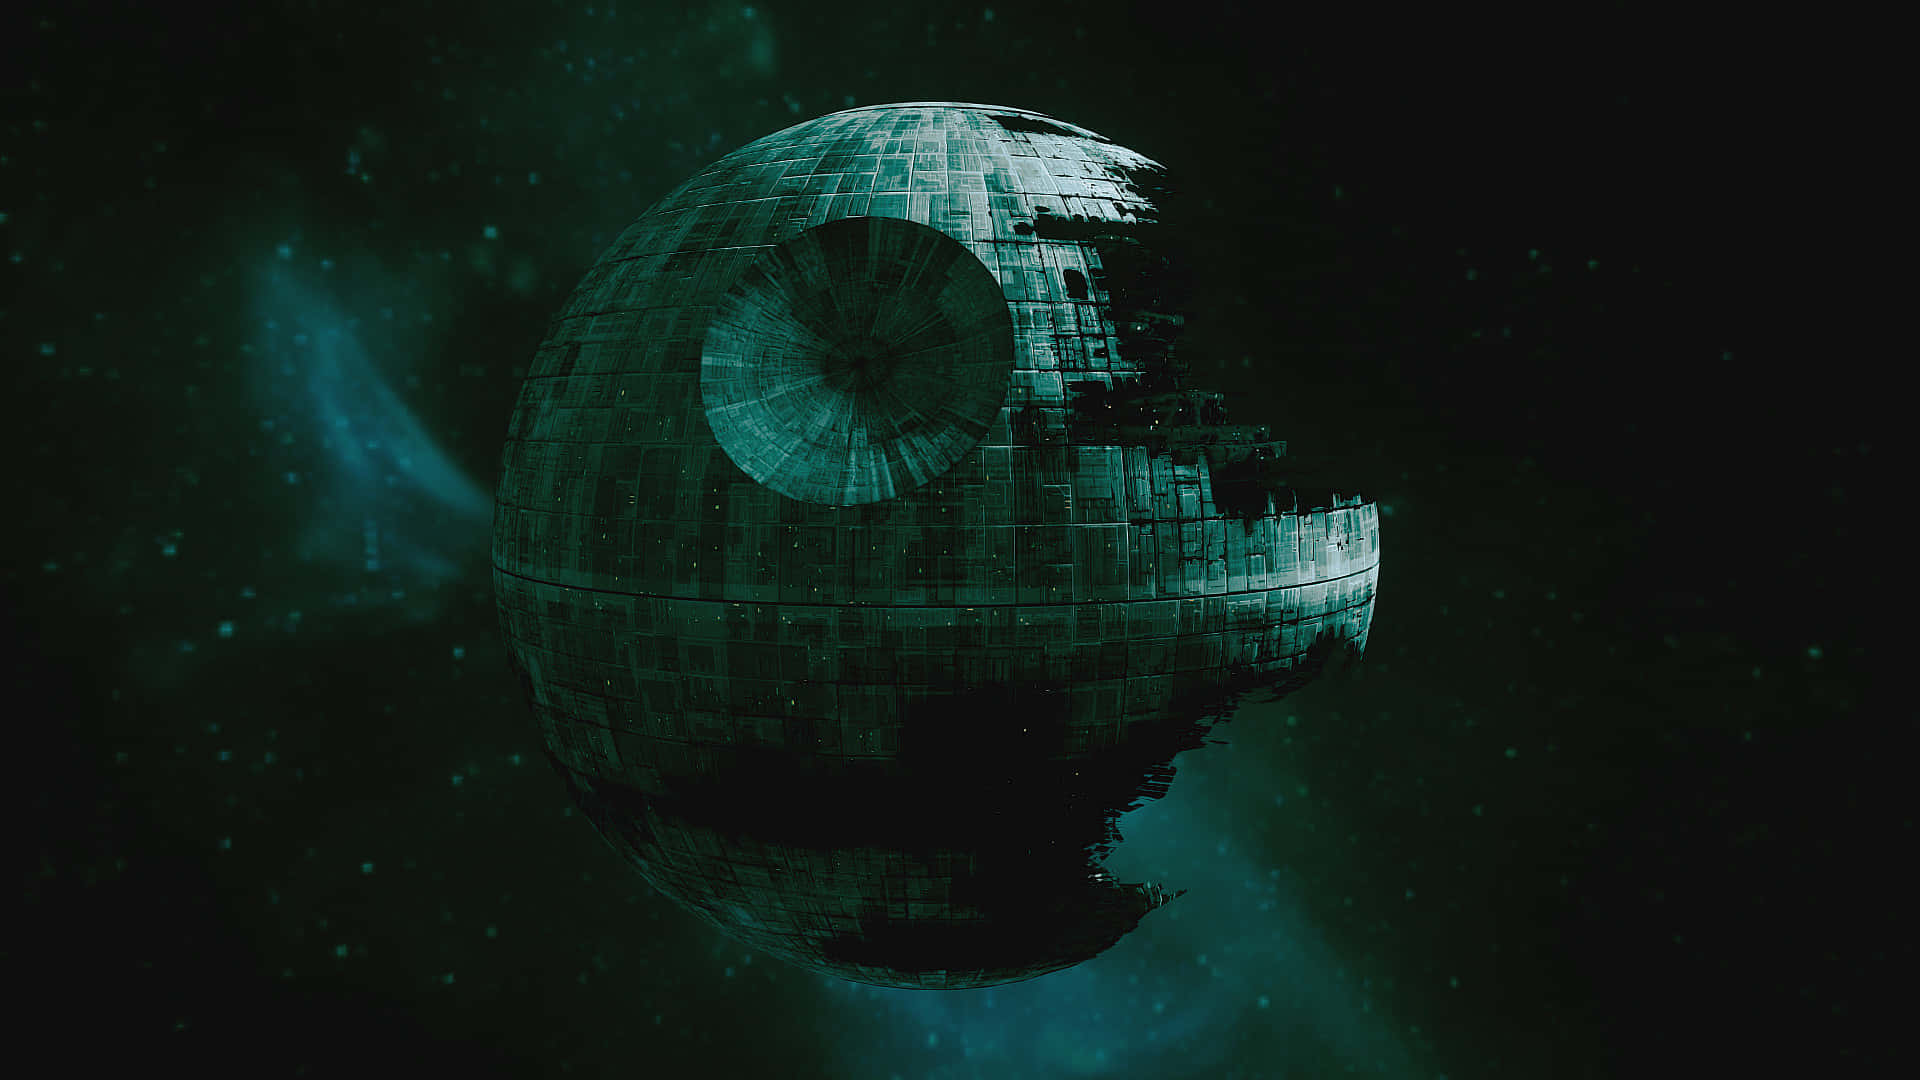 The iconic Death Star looms large over an otherwise serene landscape